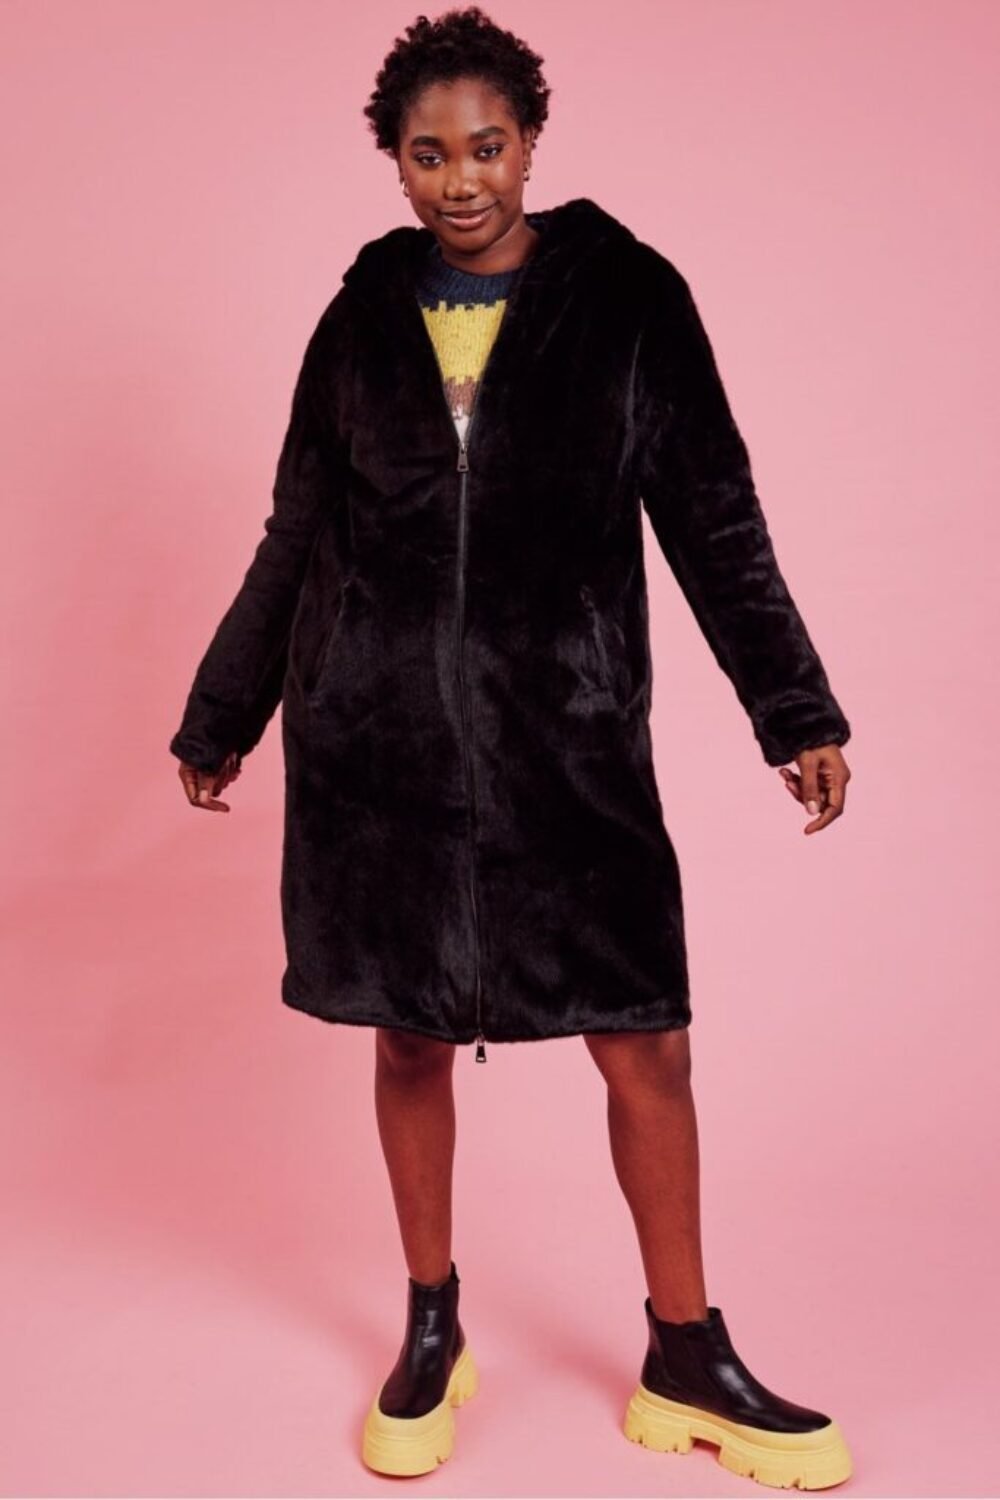 Shop Lux Black Oversized Faux Fur Jacket and women's luxury and designer clothes at www.lux-apparel.co.uk